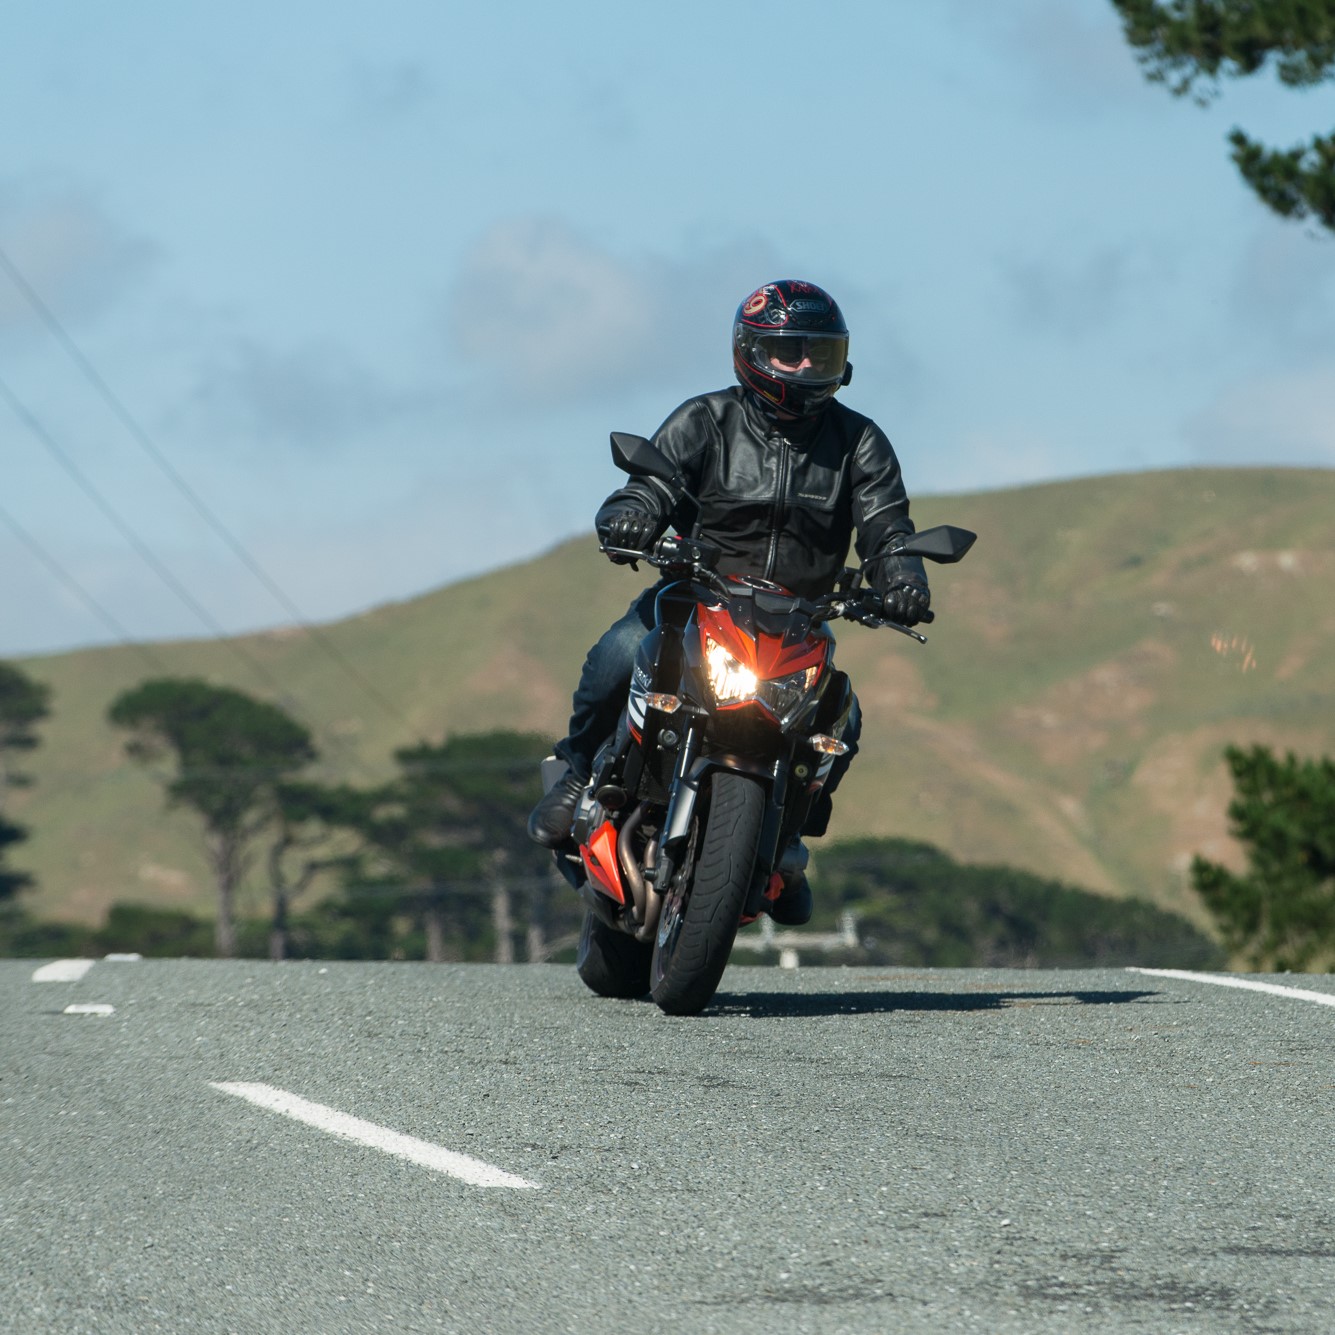 Motorcyclist riding on road